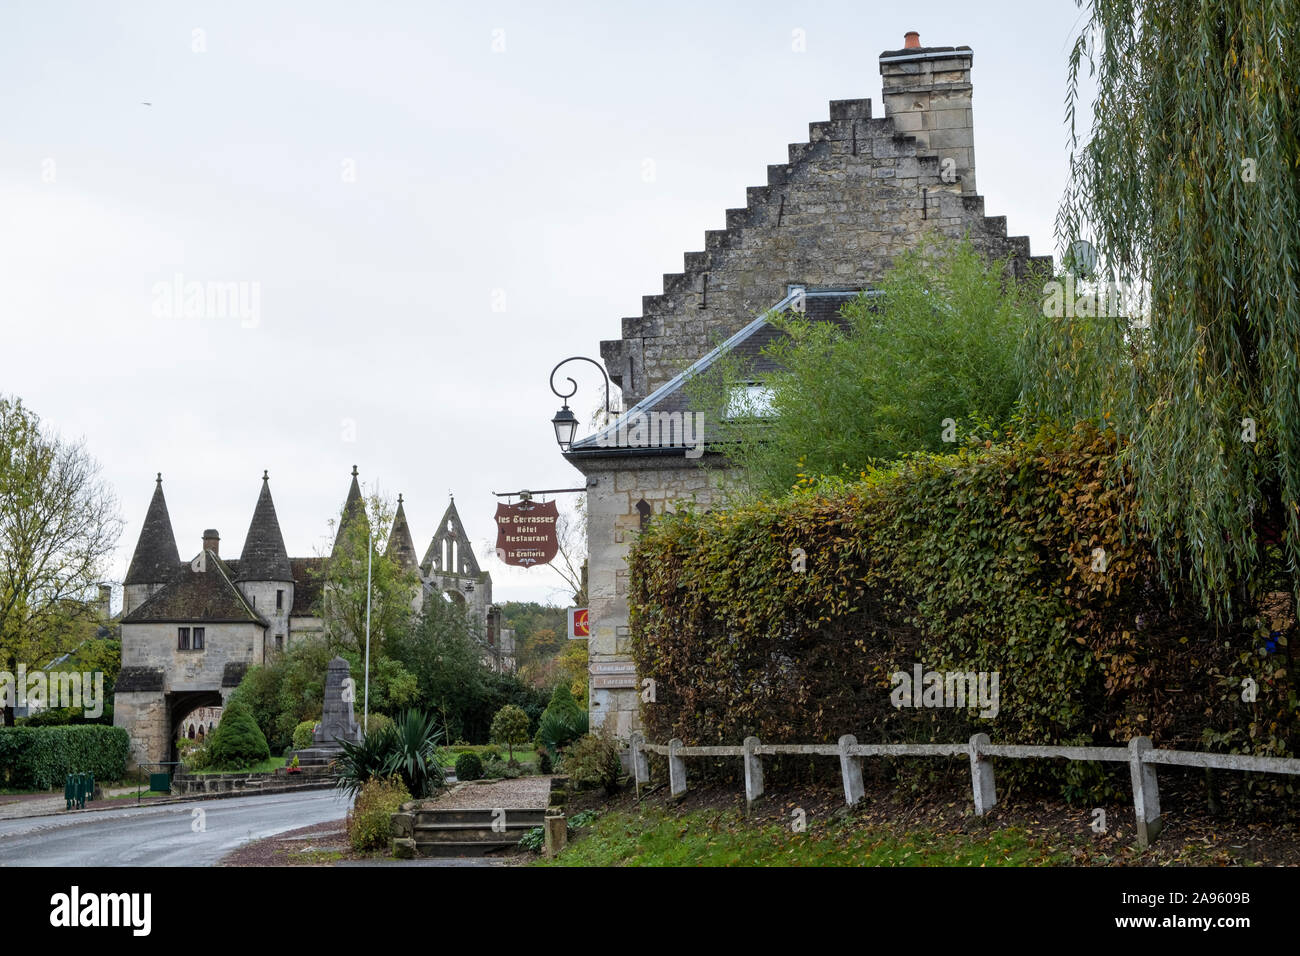 The village of Longpont is a small village located north of France. The town is located in the department of Aisne of the french region Picardy. Stock Photo